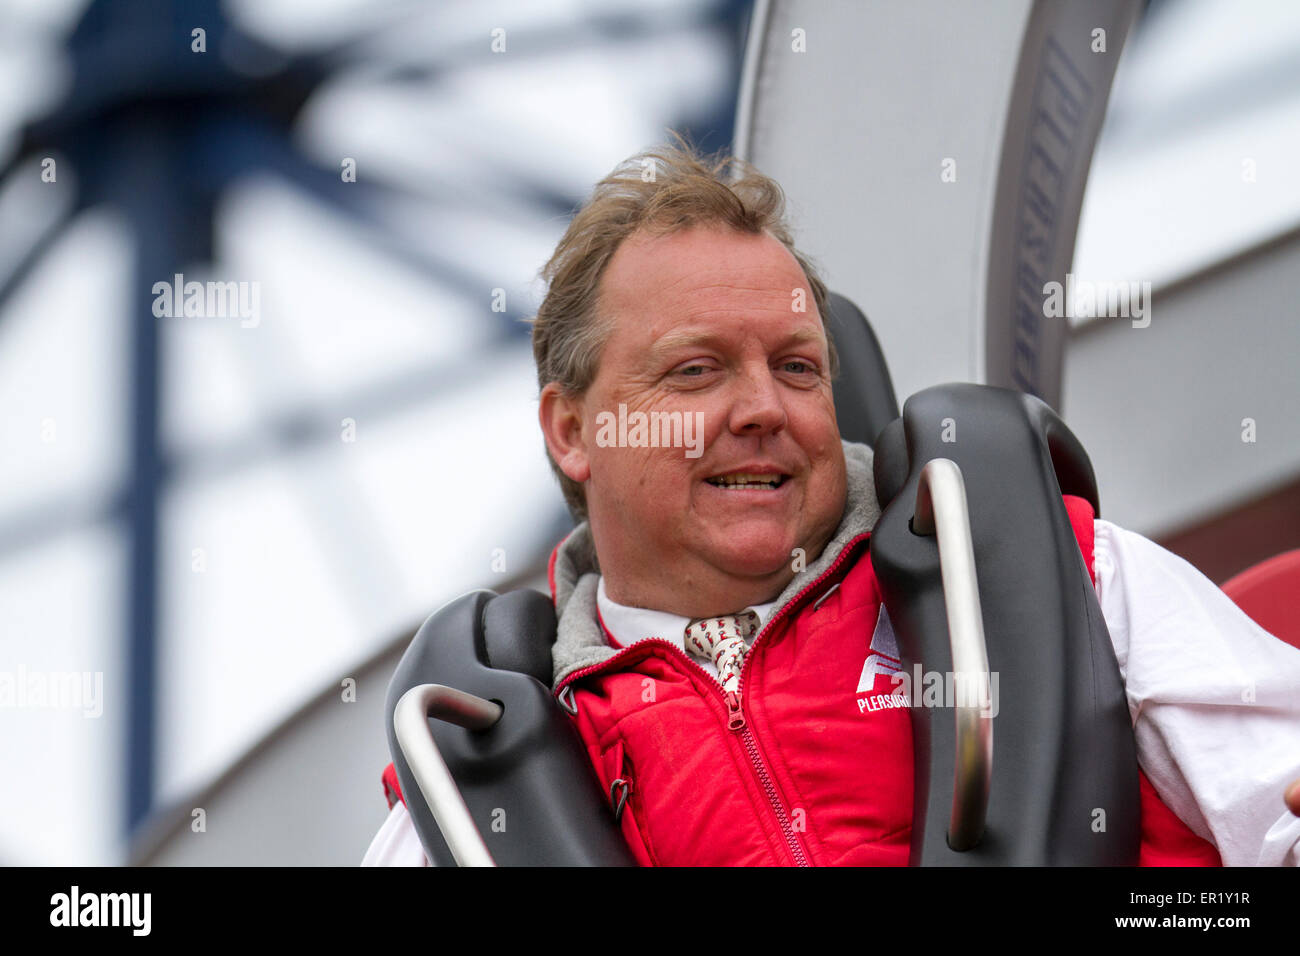 Blackpool, Lancashire, UK. 25th May, 2015. Red Arrow SkyForce Opens.   Nick Thompson Deputy Managing Director at the launch of the new ride, complete in Red Arrows livery is a new airborne adventure and display. The 72 ft white-knuckle ride allows riders to spin glide, and swirl as pilots take control of their own aeroplane in formation. Stock Photo